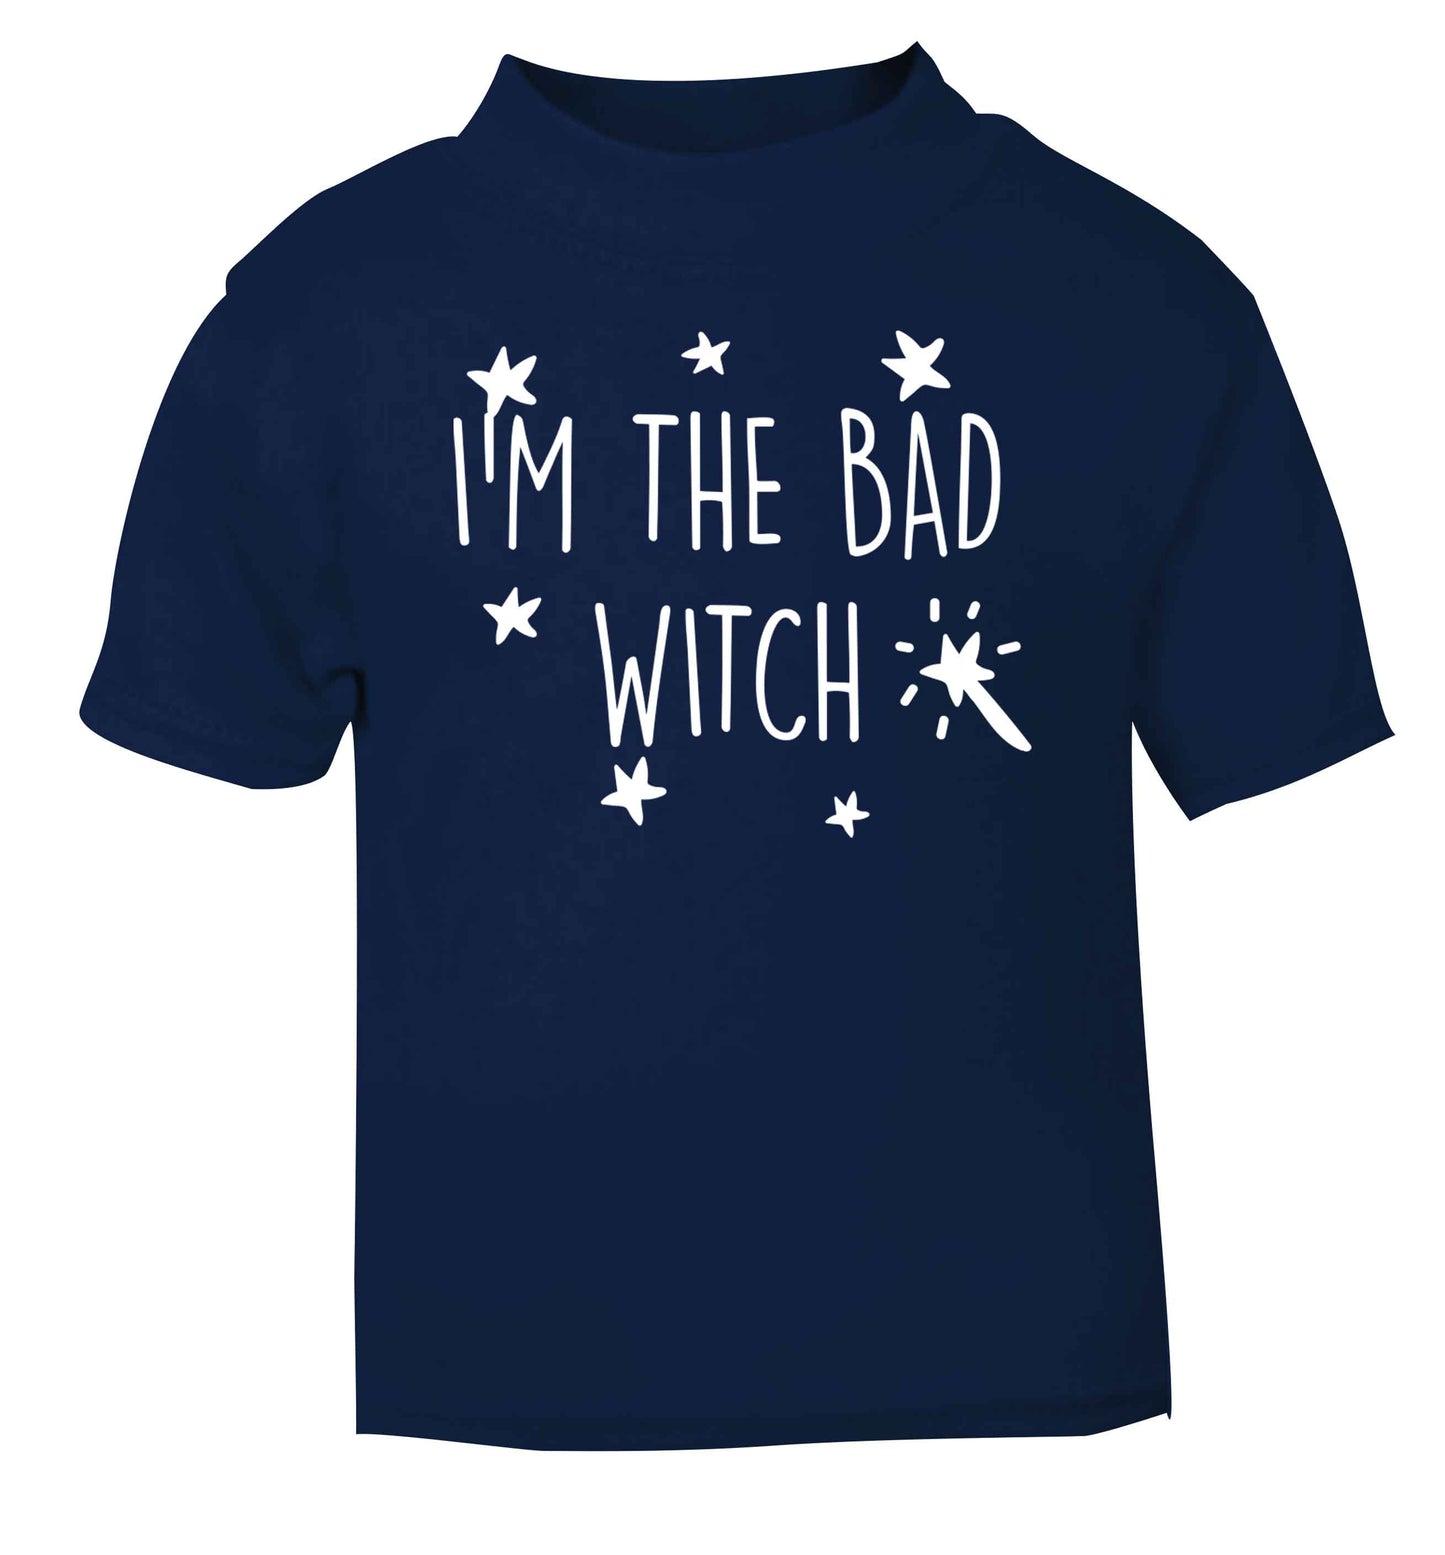 Bad witch navy baby toddler Tshirt 2 Years